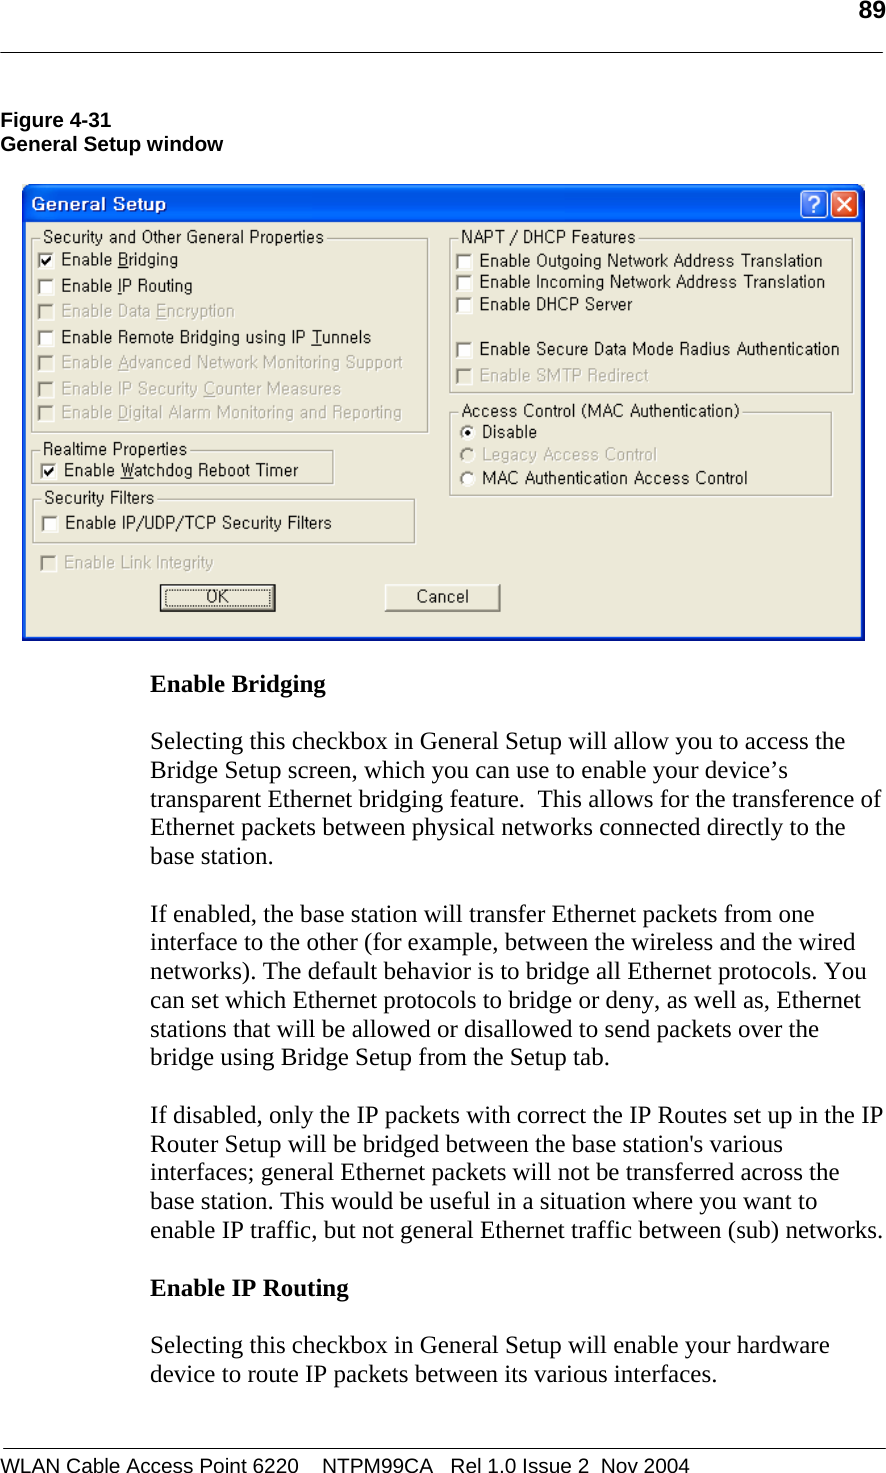   89  WLAN Cable Access Point 6220    NTPM99CA   Rel 1.0 Issue 2  Nov 2004 Figure 4-31 General Setup window    Enable Bridging  Selecting this checkbox in General Setup will allow you to access the Bridge Setup screen, which you can use to enable your device’s transparent Ethernet bridging feature.  This allows for the transference of Ethernet packets between physical networks connected directly to the base station.   If enabled, the base station will transfer Ethernet packets from one interface to the other (for example, between the wireless and the wired networks). The default behavior is to bridge all Ethernet protocols. You can set which Ethernet protocols to bridge or deny, as well as, Ethernet stations that will be allowed or disallowed to send packets over the bridge using Bridge Setup from the Setup tab.  If disabled, only the IP packets with correct the IP Routes set up in the IP Router Setup will be bridged between the base station&apos;s various interfaces; general Ethernet packets will not be transferred across the base station. This would be useful in a situation where you want to enable IP traffic, but not general Ethernet traffic between (sub) networks.  Enable IP Routing  Selecting this checkbox in General Setup will enable your hardware device to route IP packets between its various interfaces.  